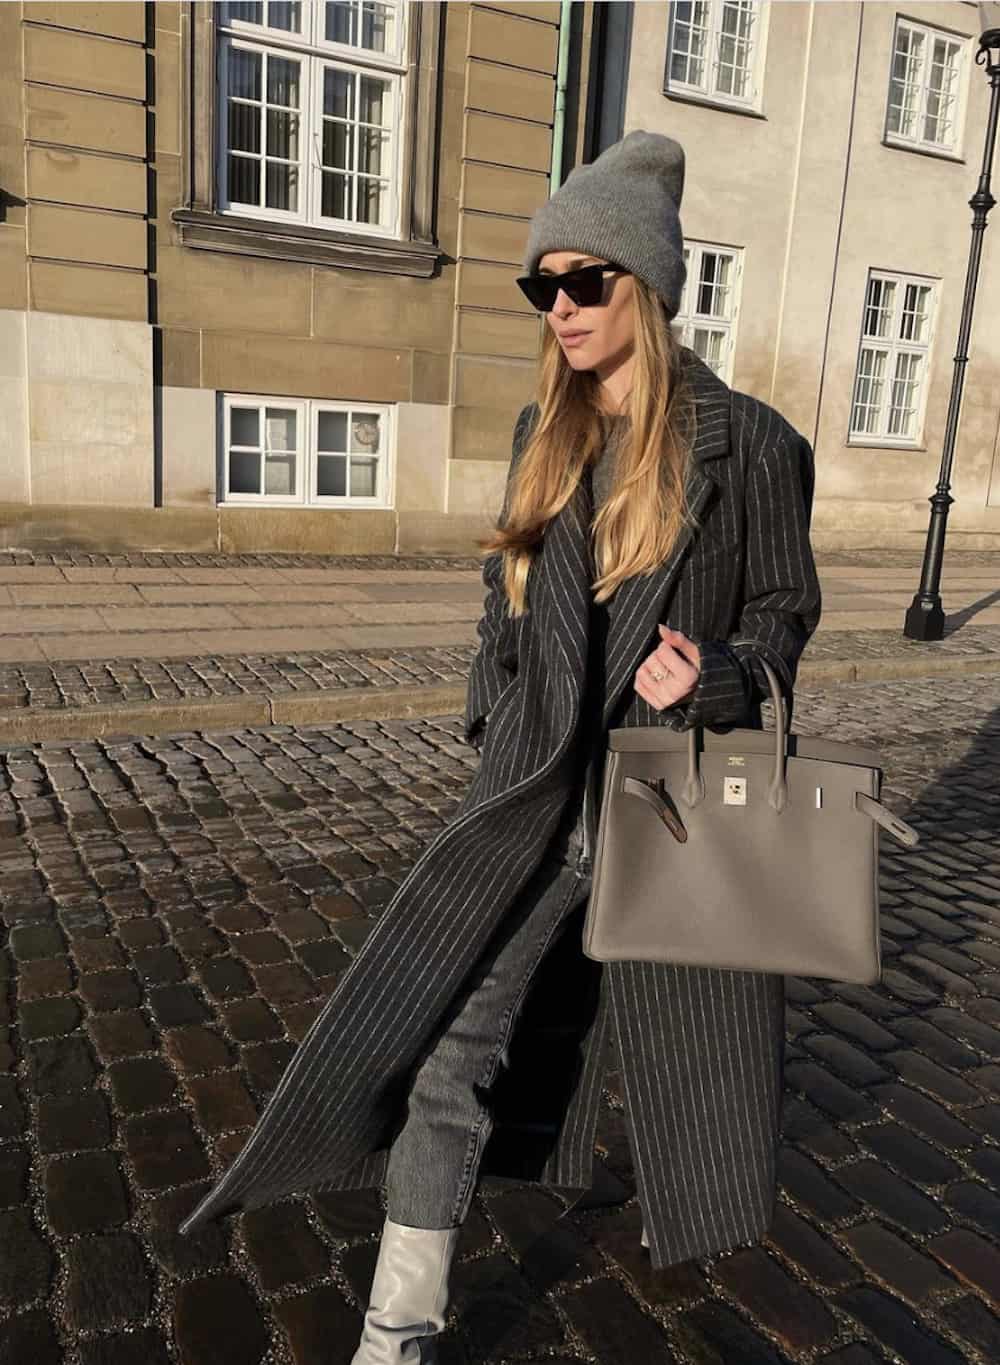 image of a woman in a wool trench coat and grey toque carrying a Hermes Birkin bag in grey